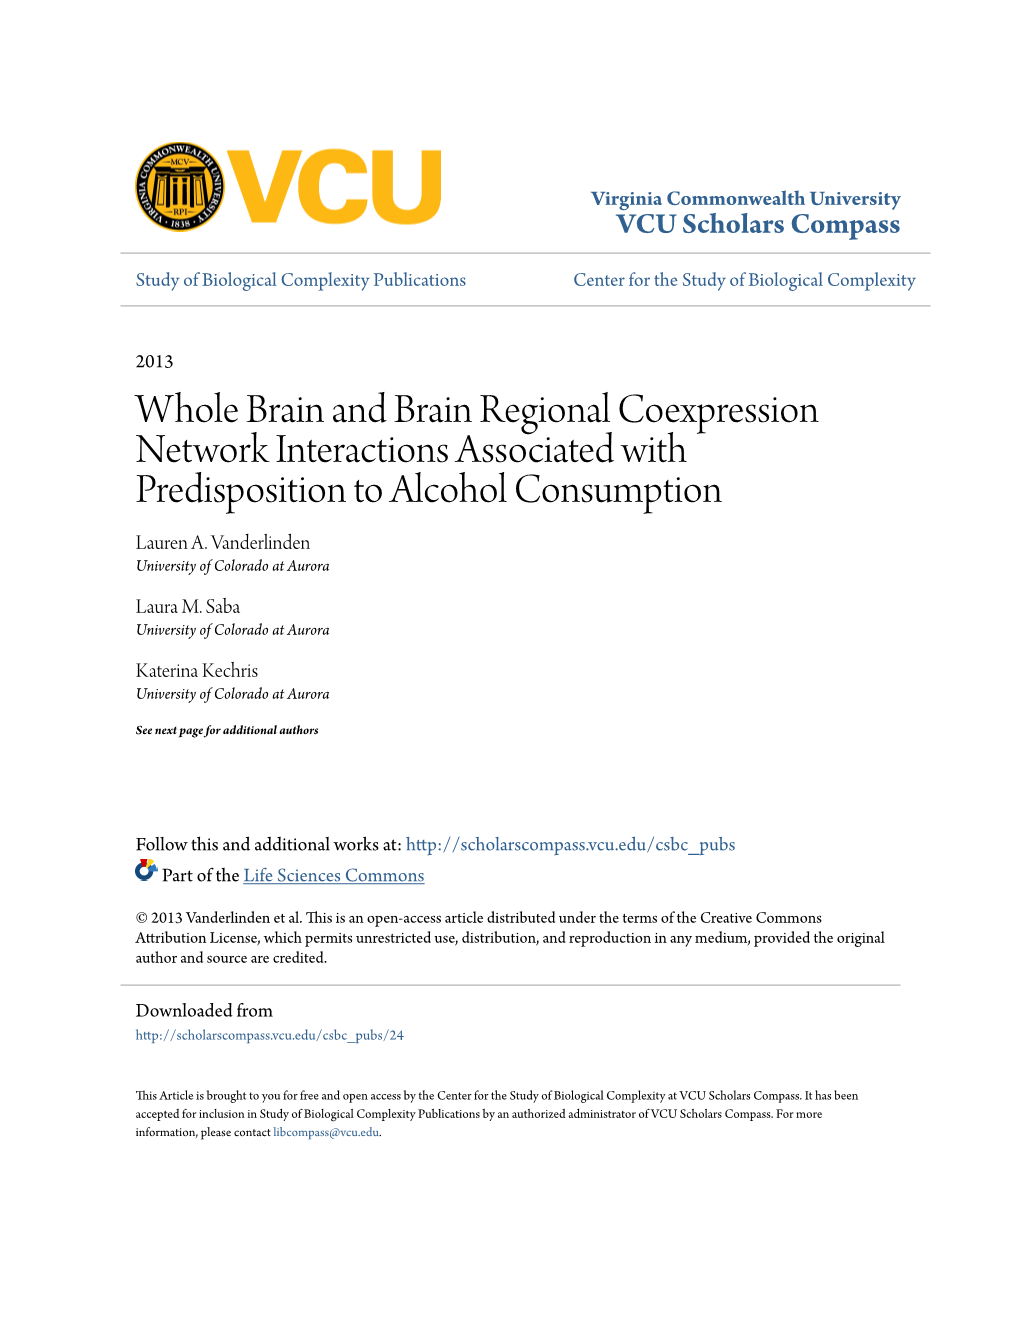 Whole Brain and Brain Regional Coexpression Network Interactions Associated with Predisposition to Alcohol Consumption Lauren A